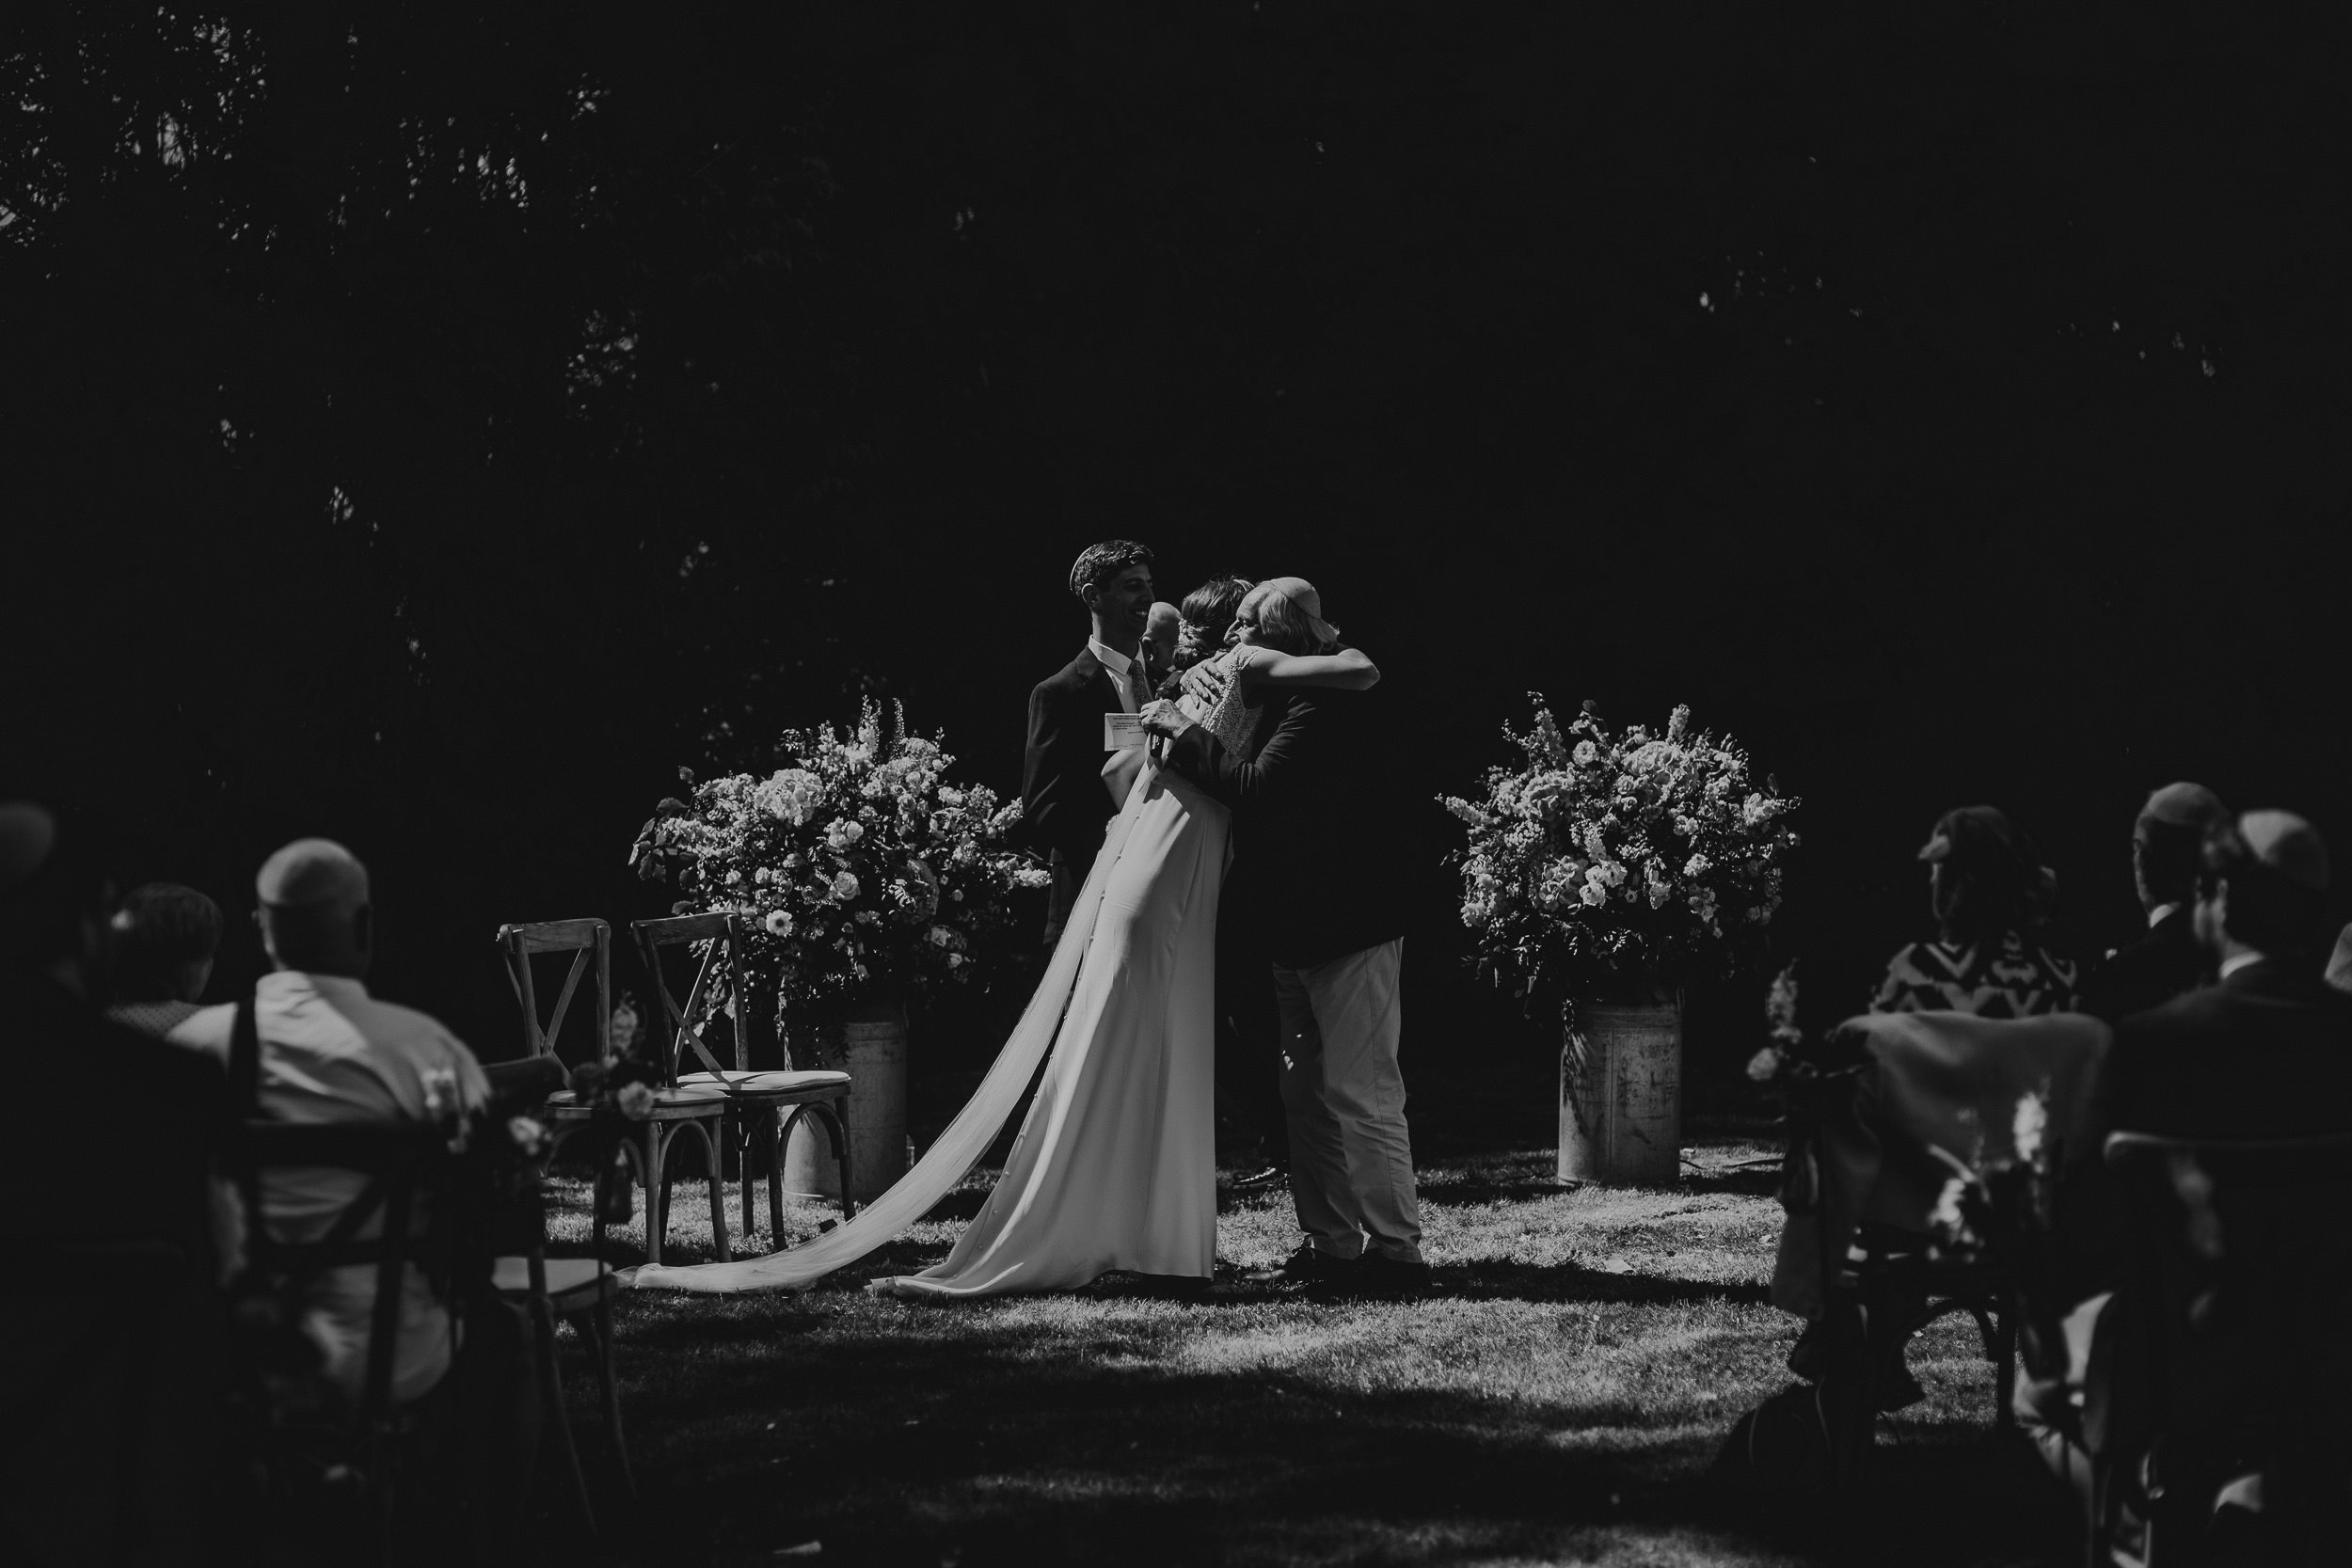 A wedding photo capturing the bride and groom intimately kissing.